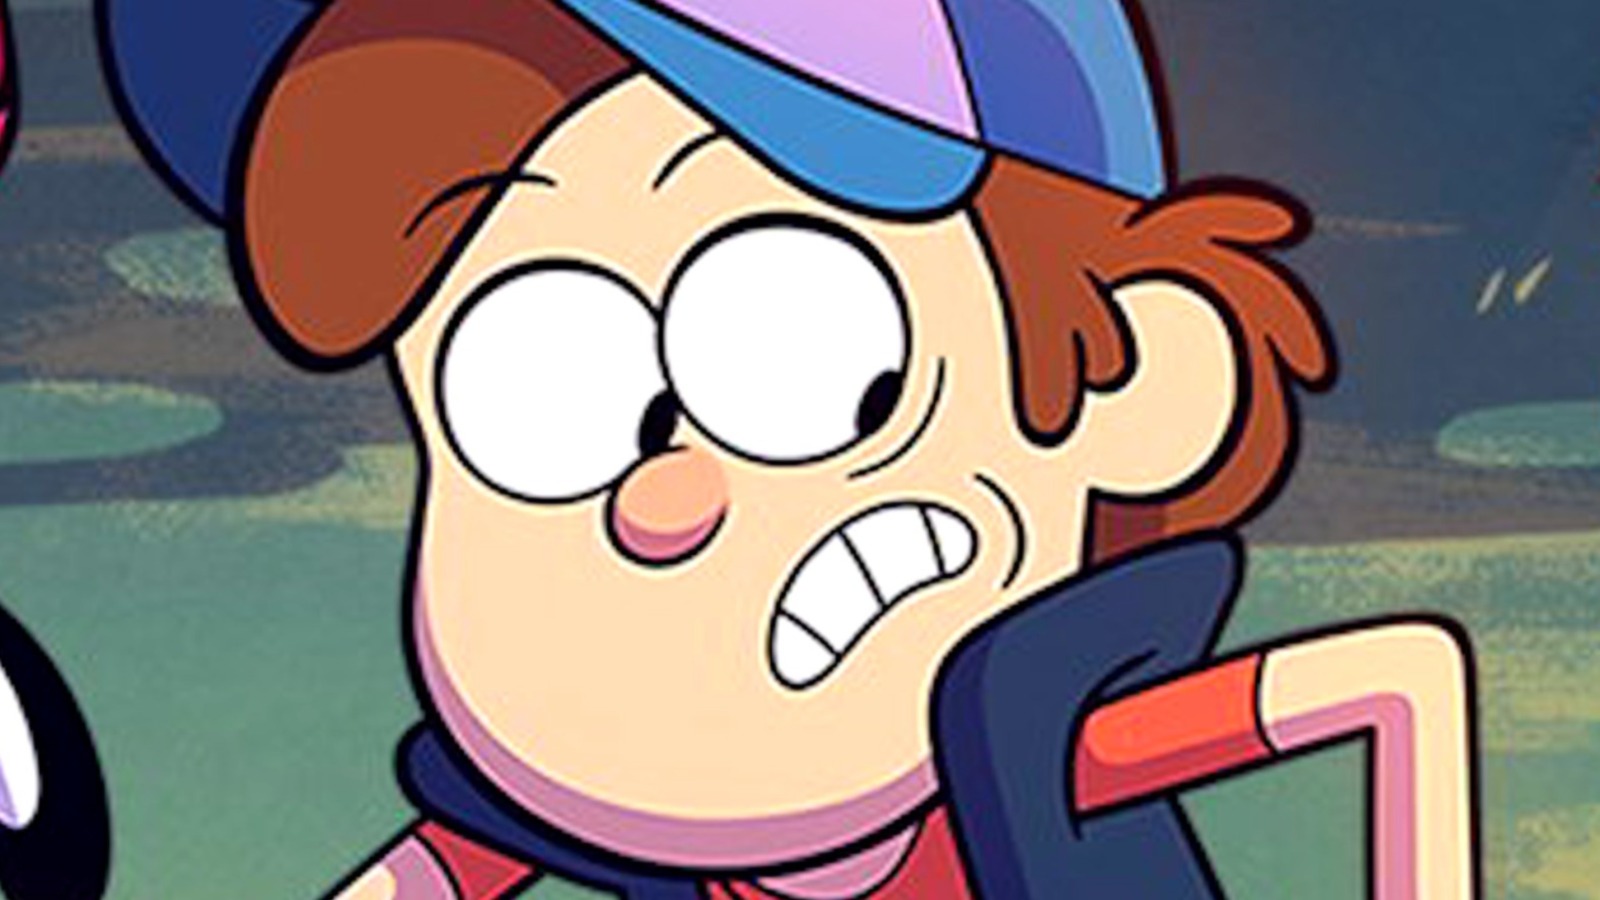 We Finally Understand The Ending Of Gravity Falls